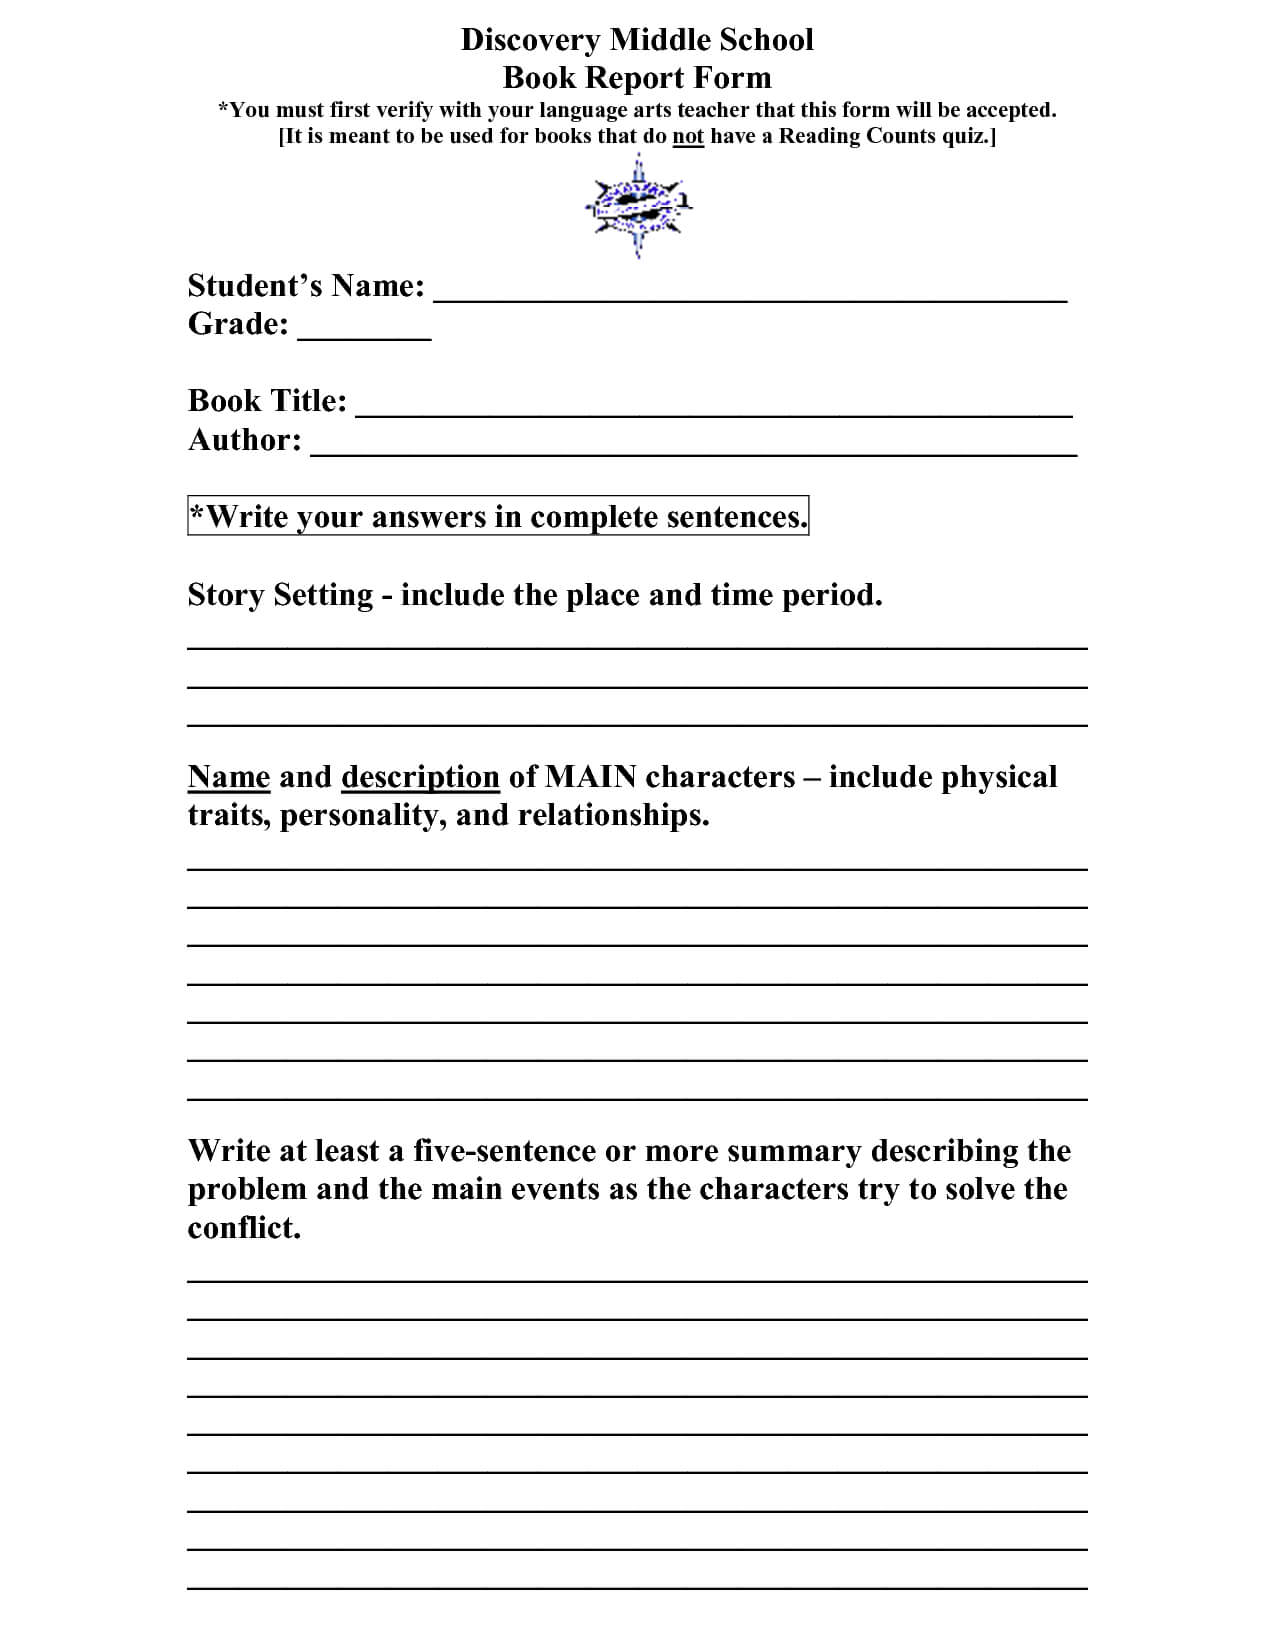 Scope Of Work Template | Teaching & Learning | Middle School With Regard To Book Report Template Middle School